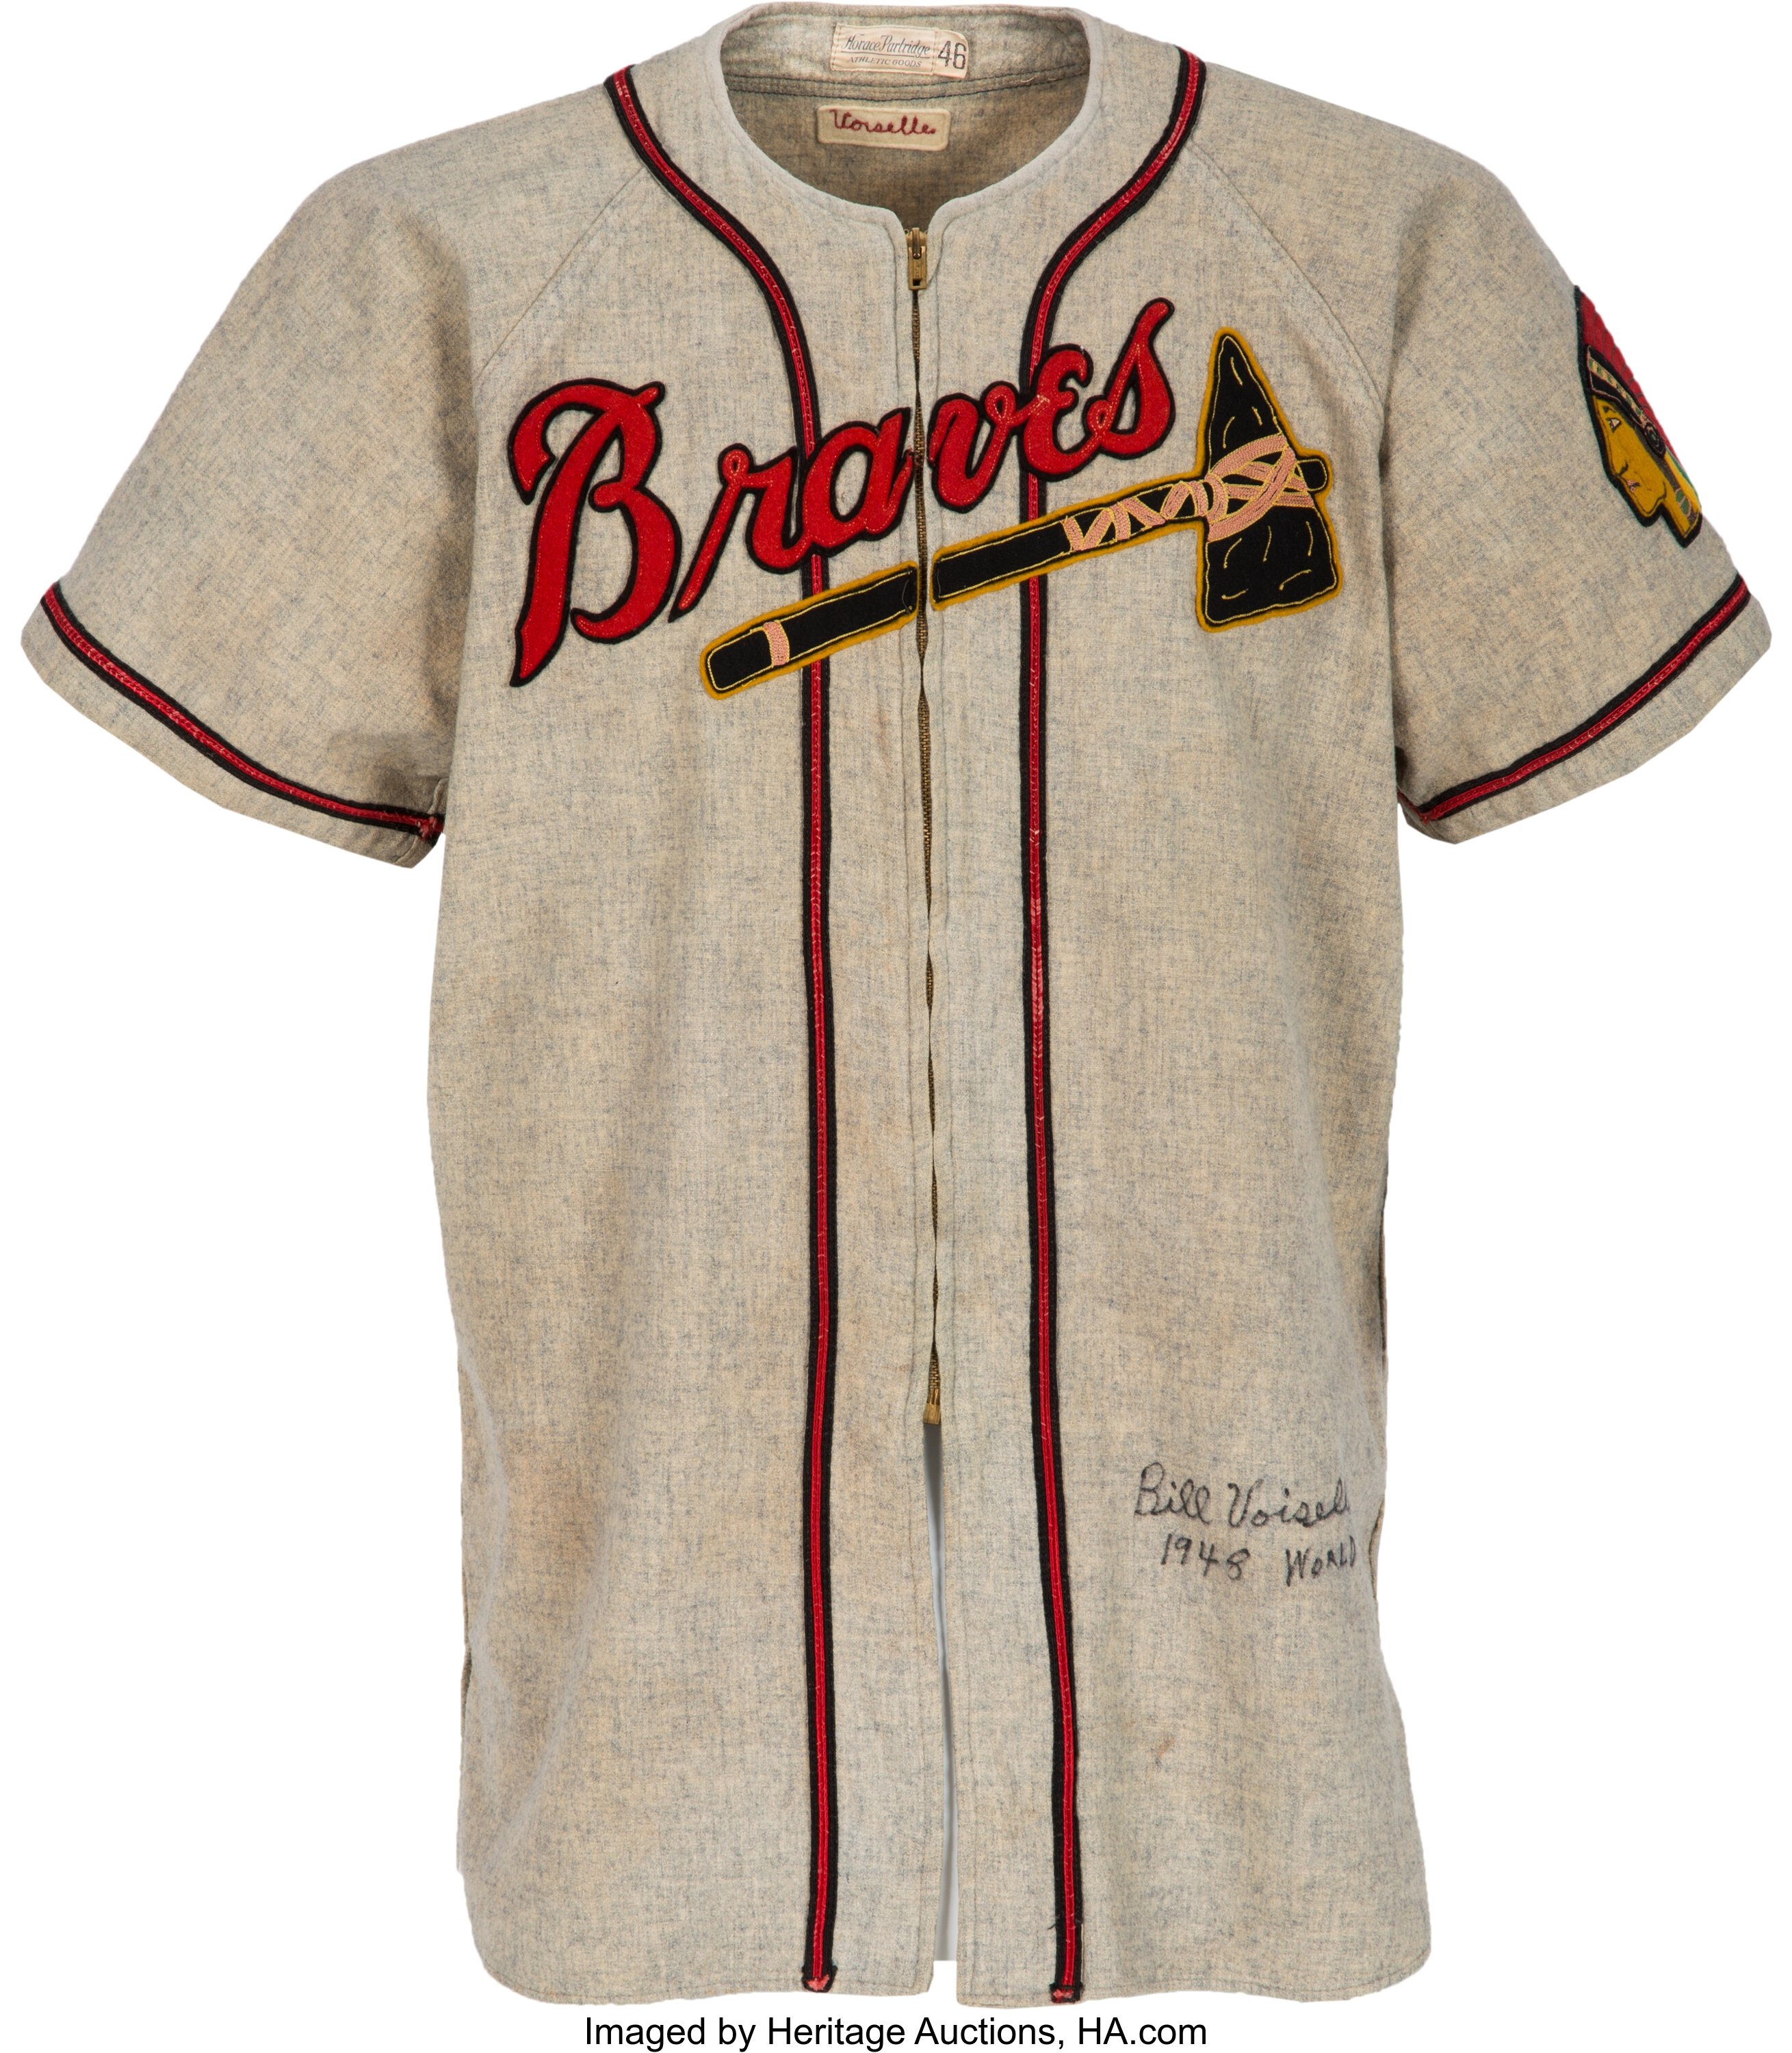 Boston Braves become the Milwaukee Braves — March 18, 1953